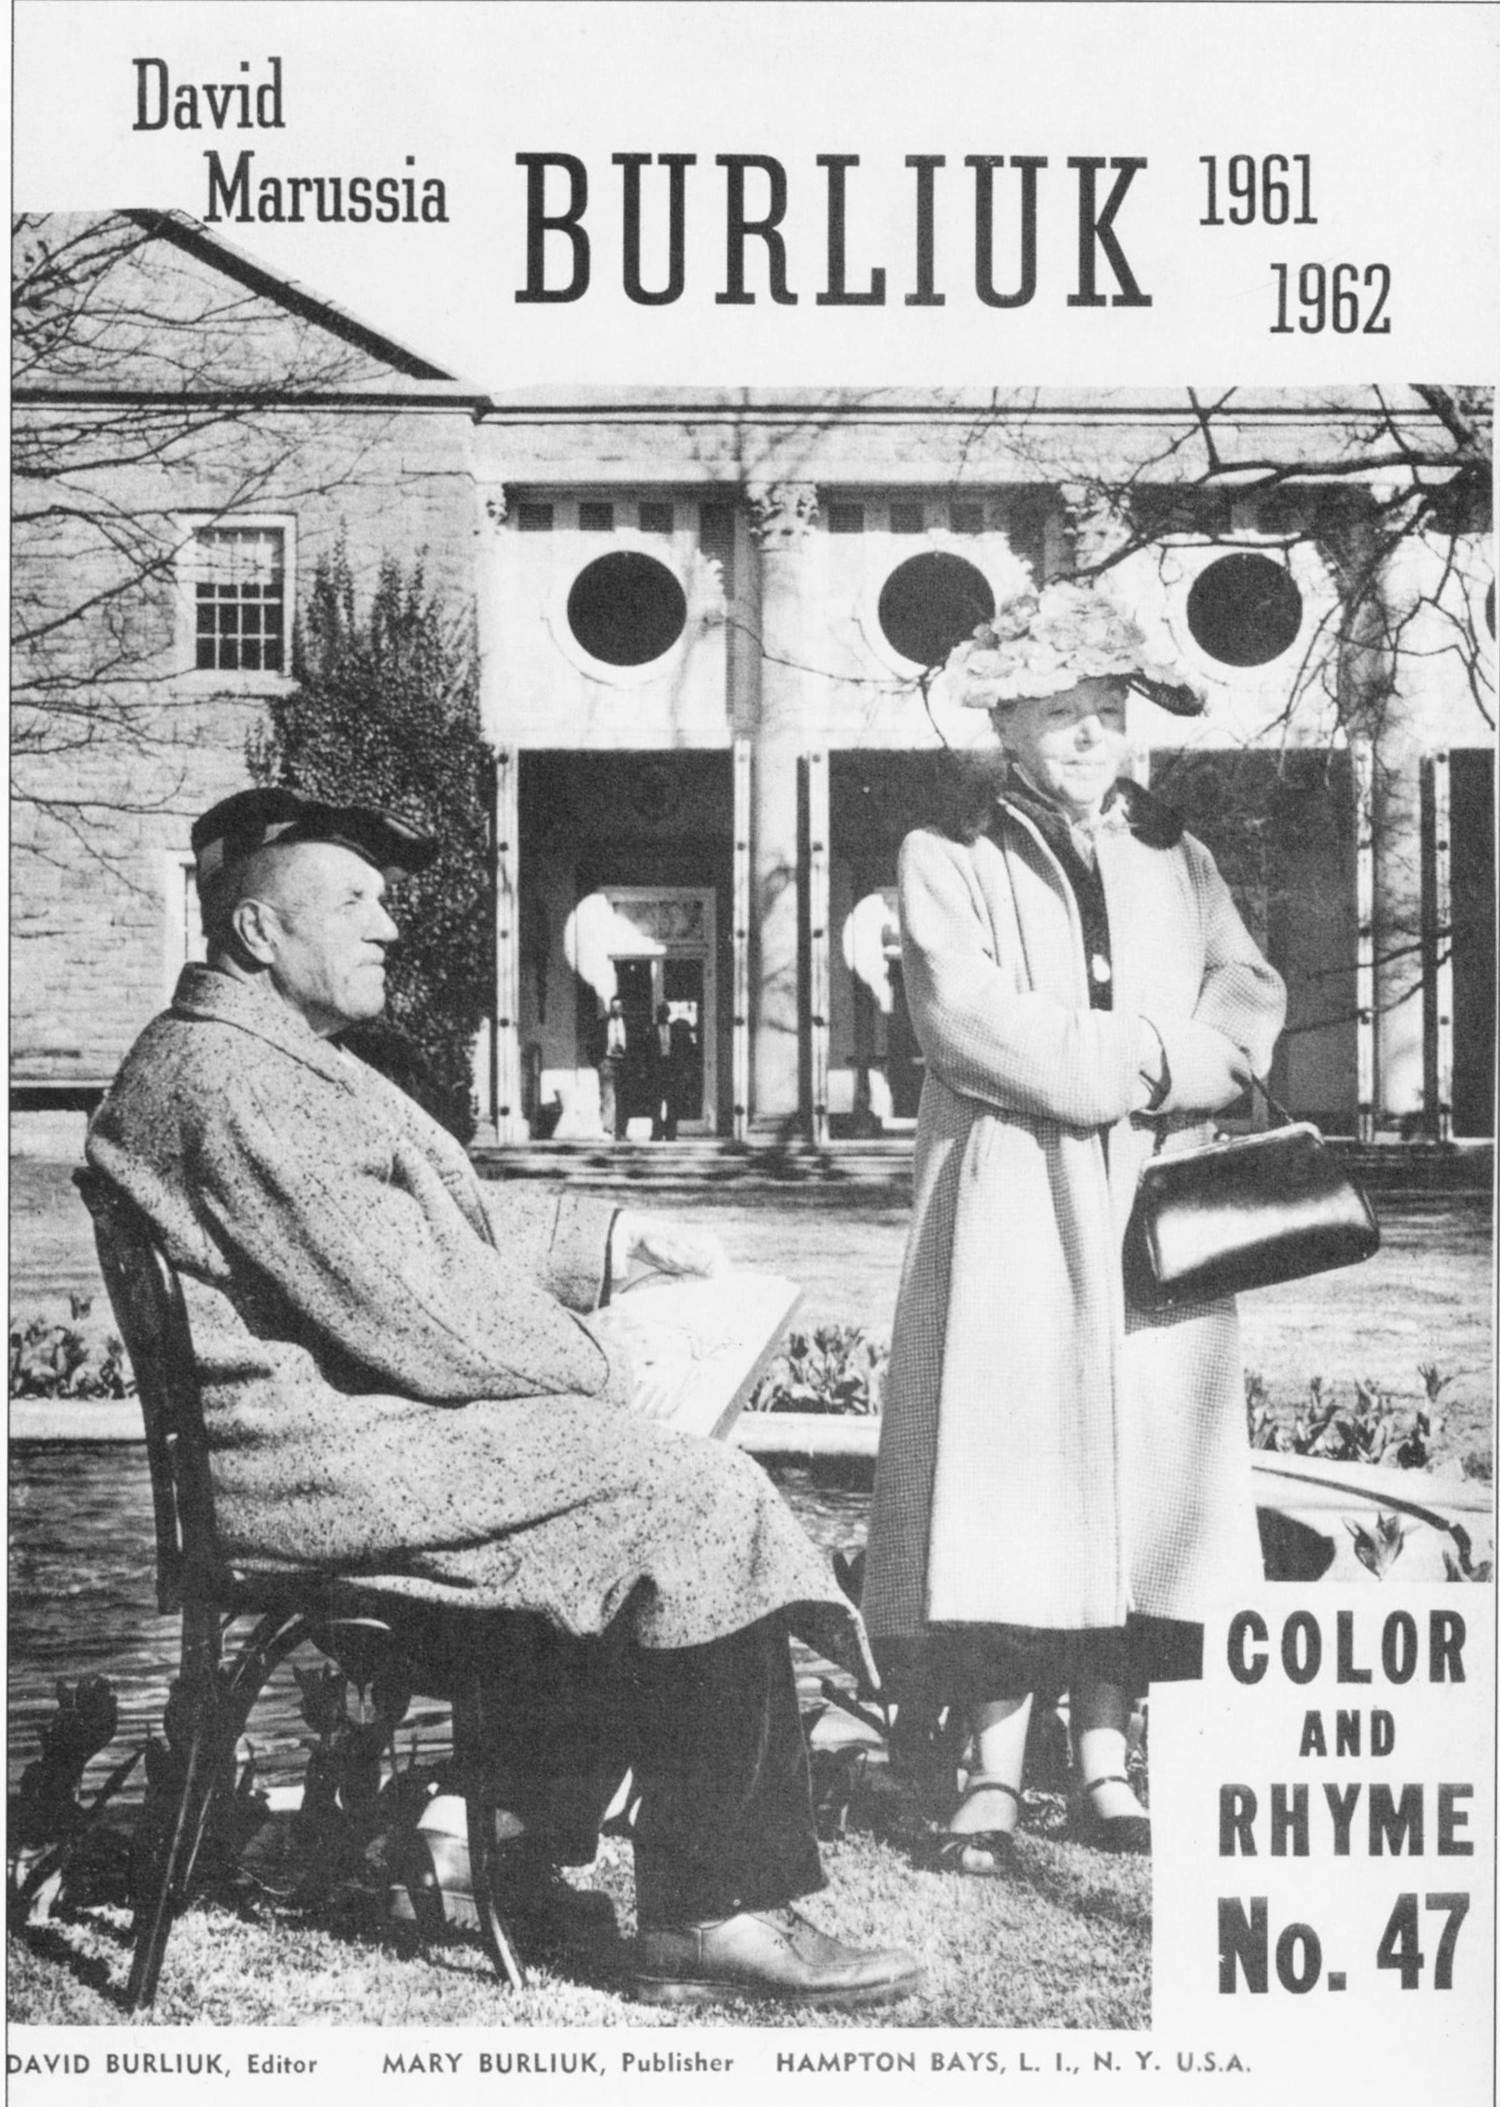 David and Marussia Burliuk on the cover of the 1961-62 cover their annual art periodical 